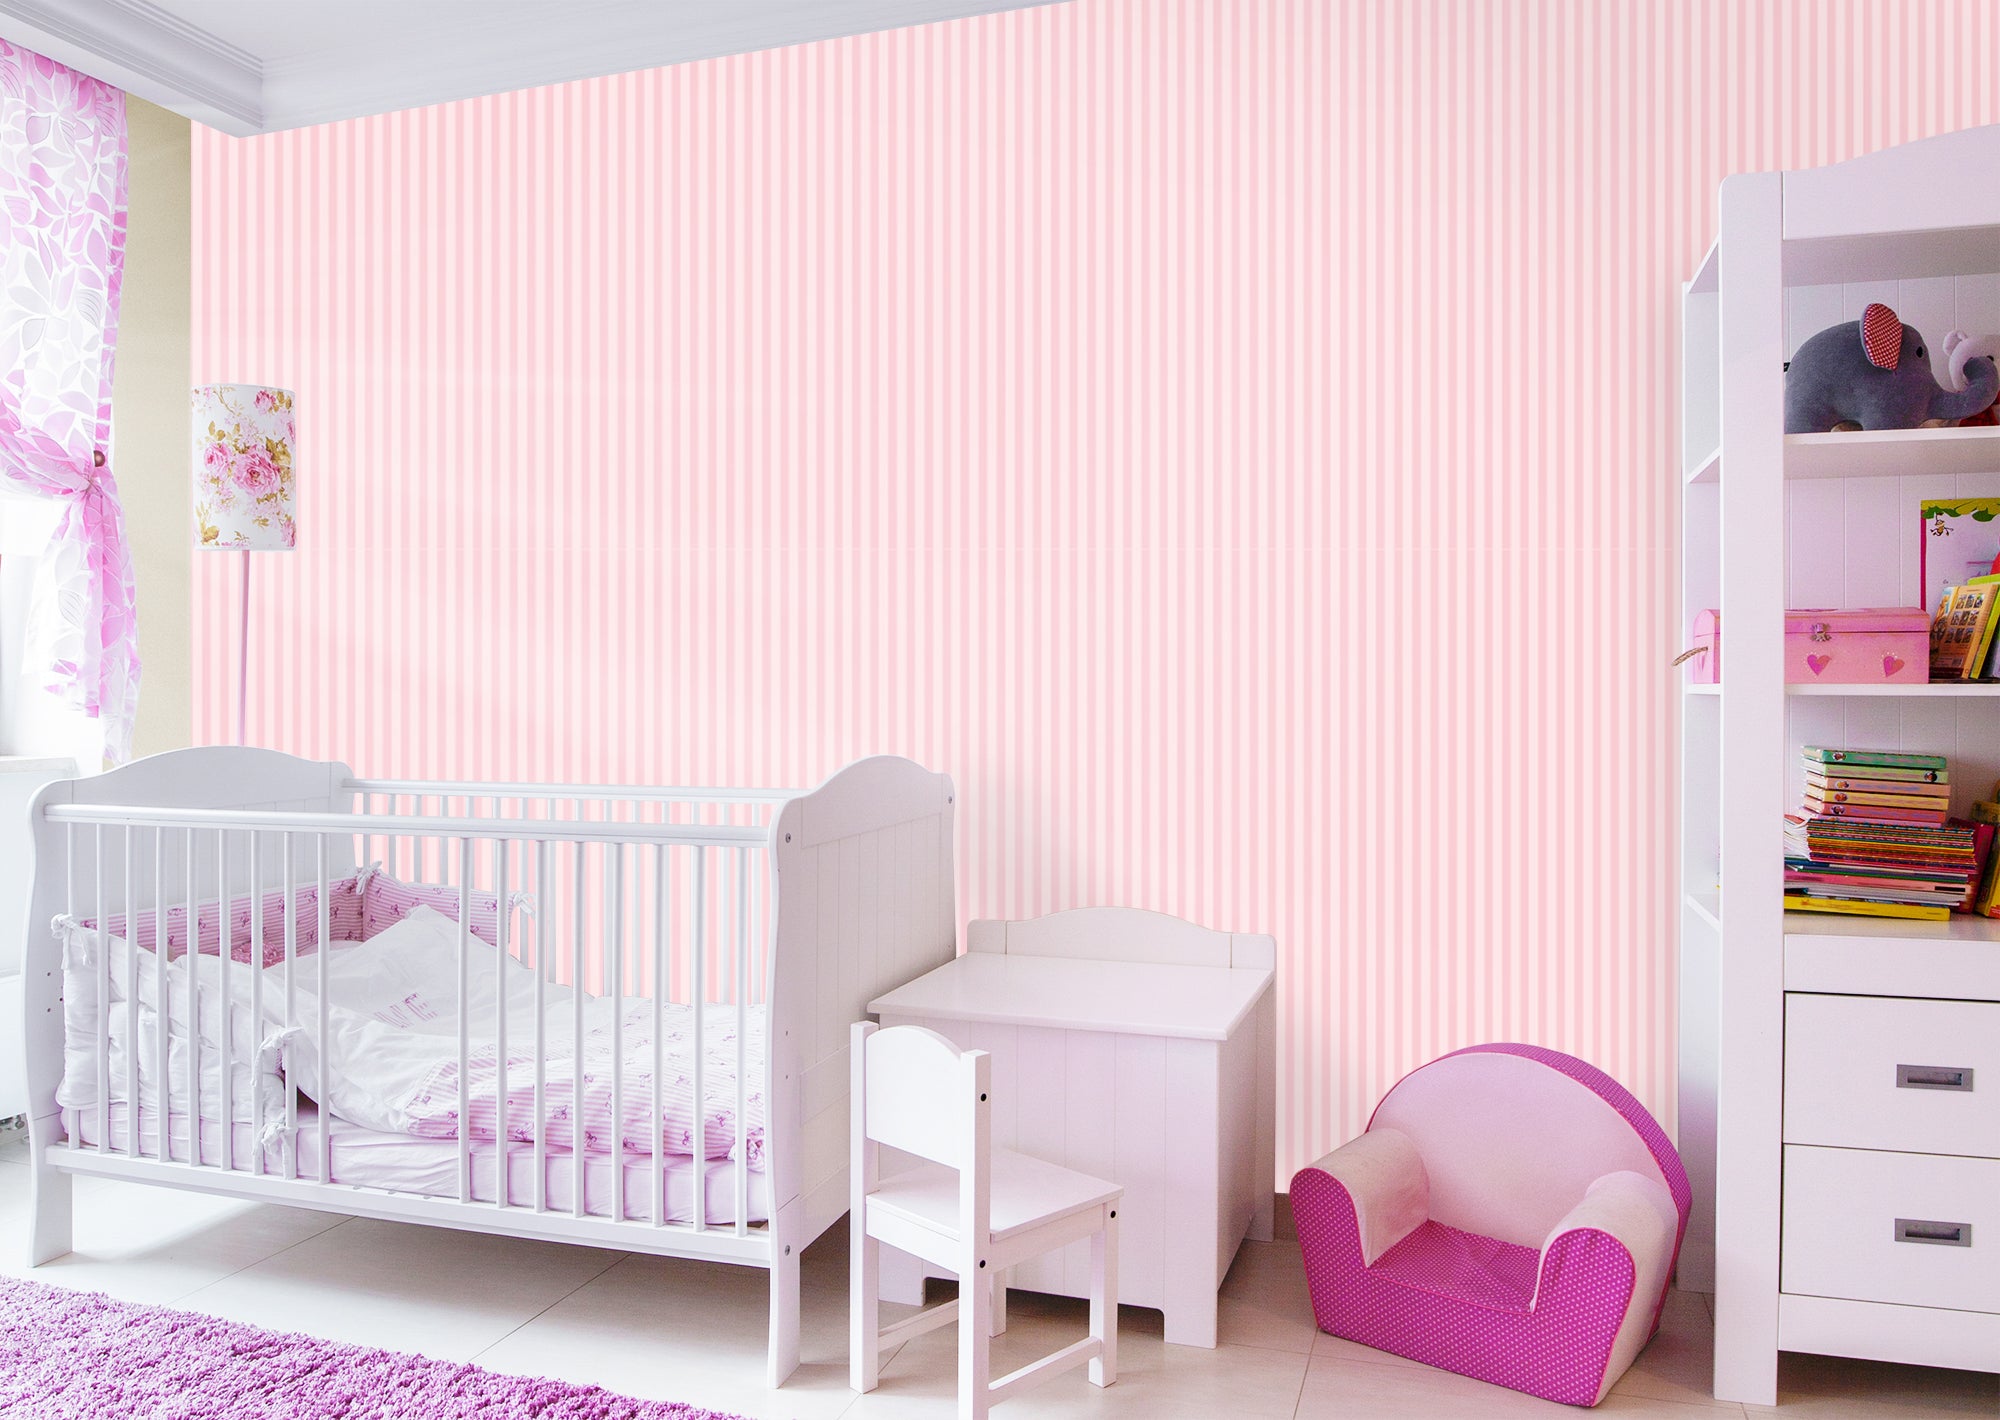 Dont Pink Twice About It - Removable Peel & Stick Wallpaper 24" x 12.5 (25 sf) by Fathead